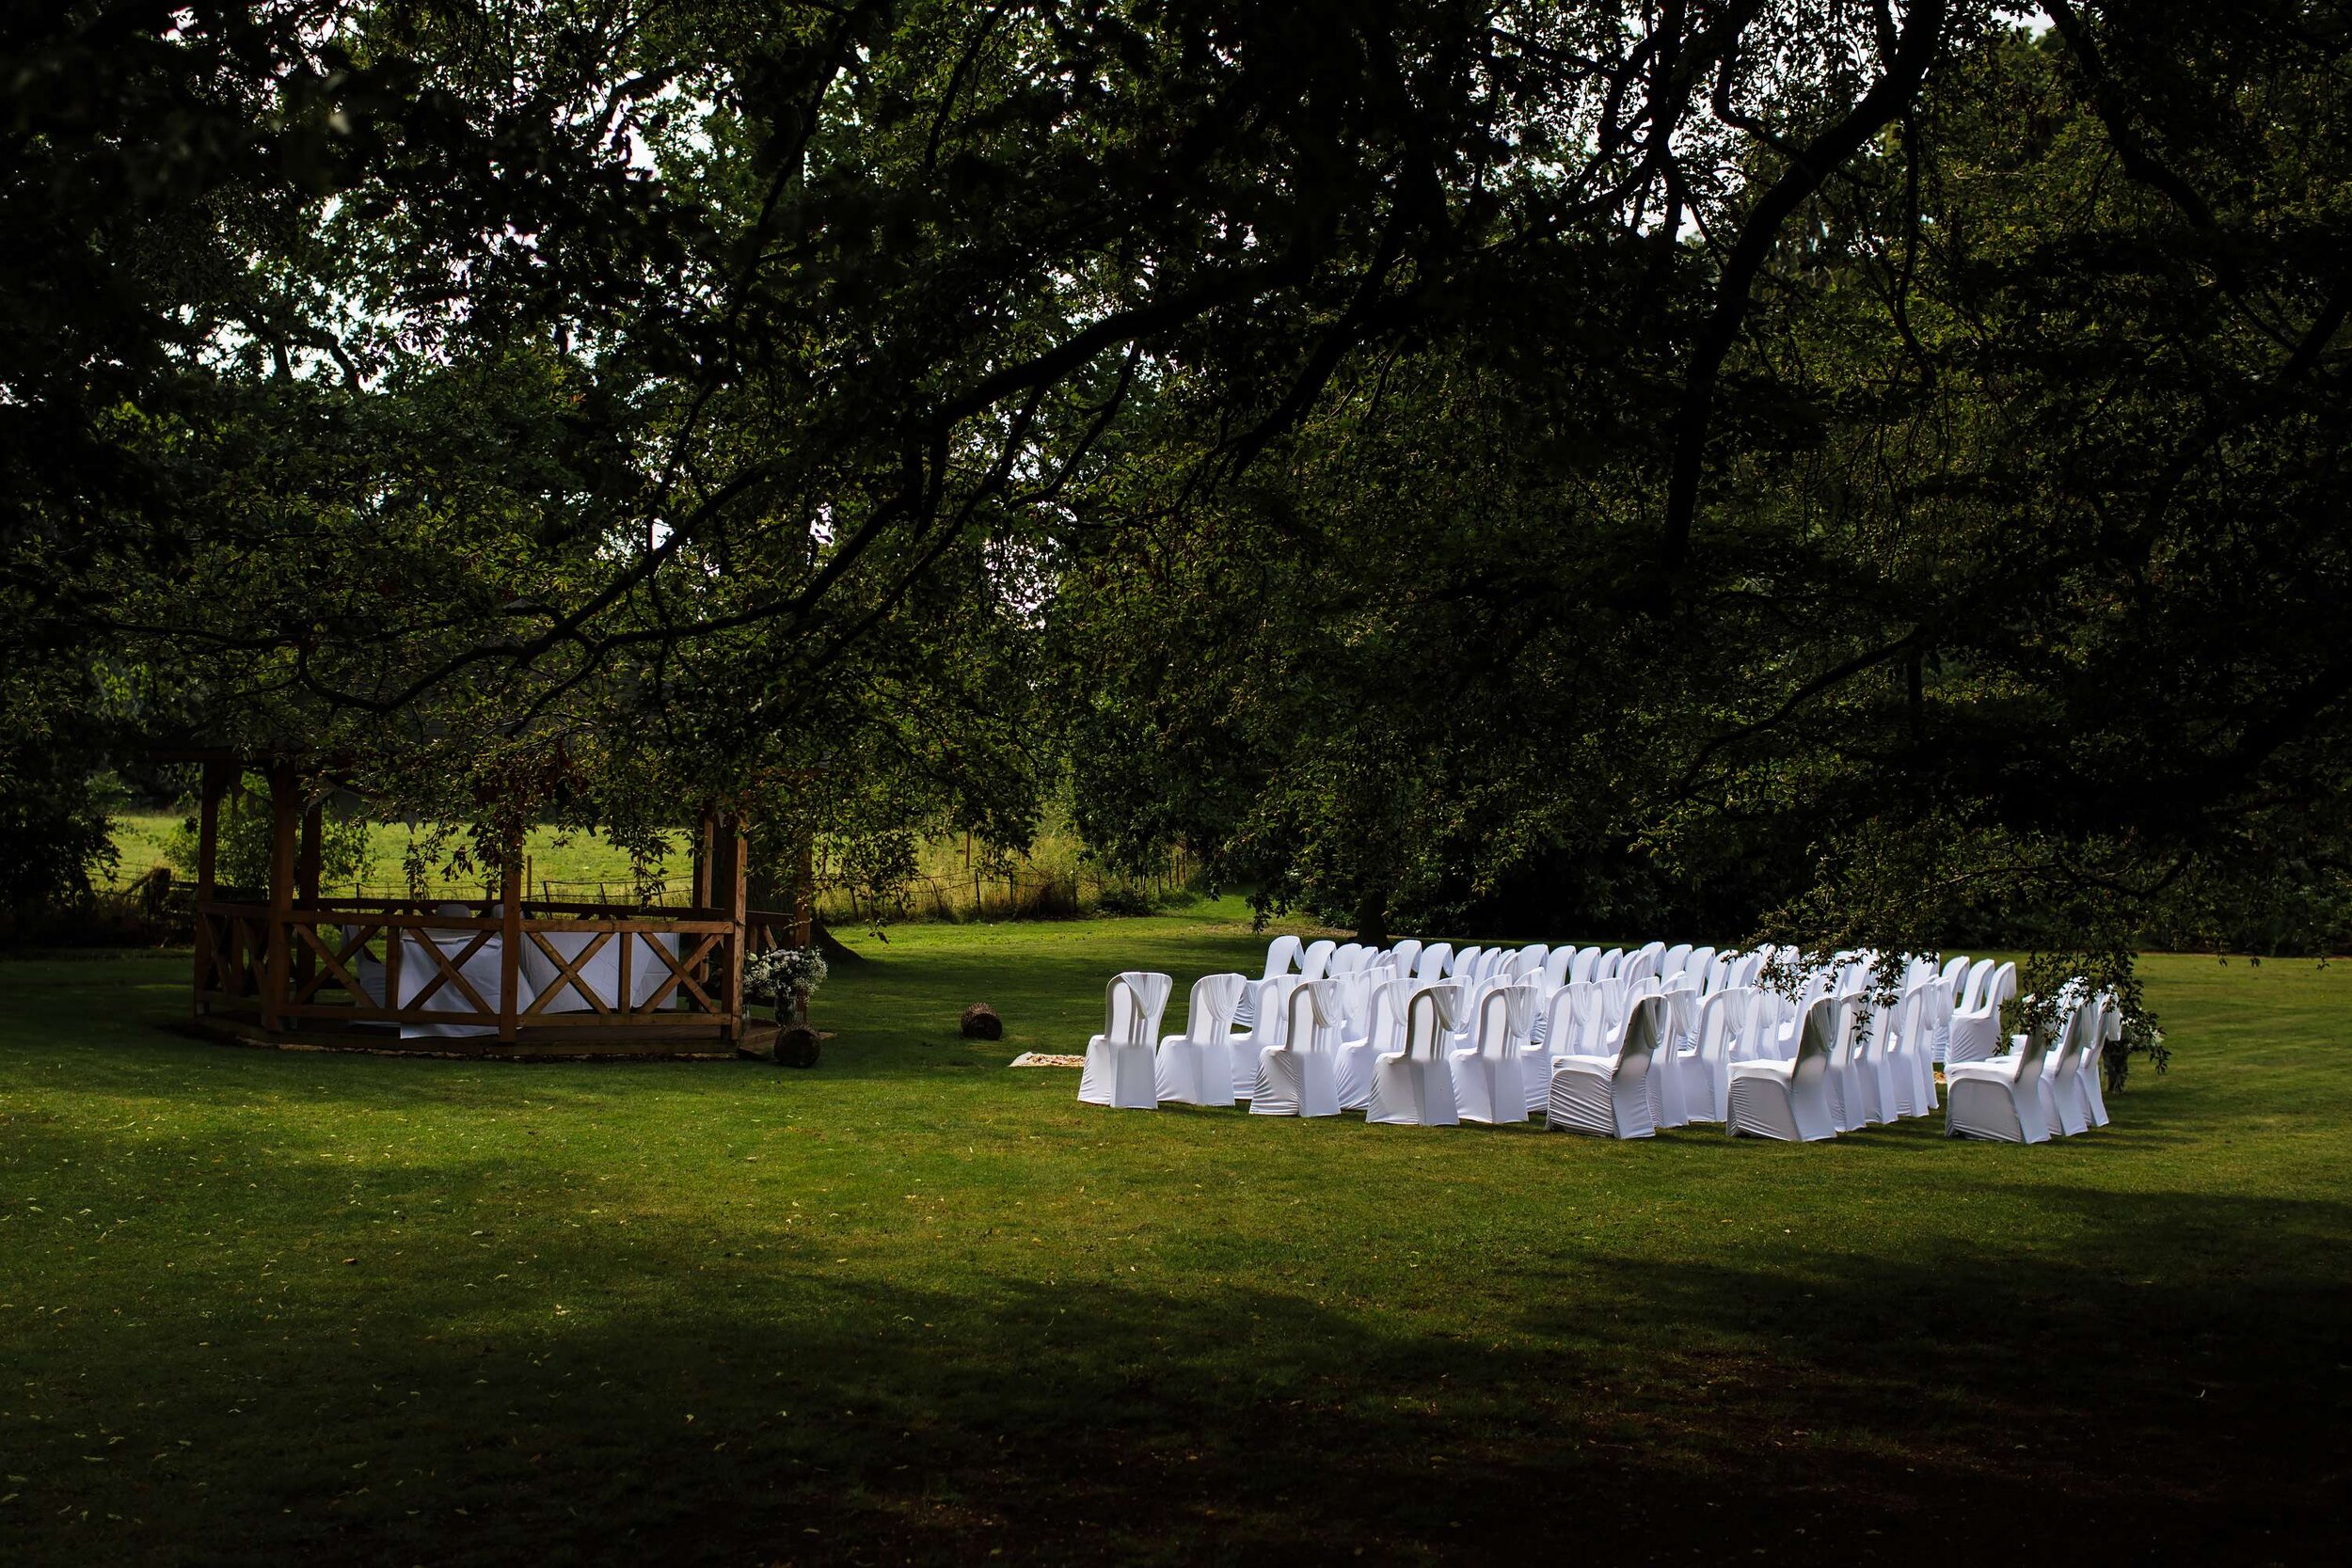 Outdoor seating set up for a wedding in Yorkshire